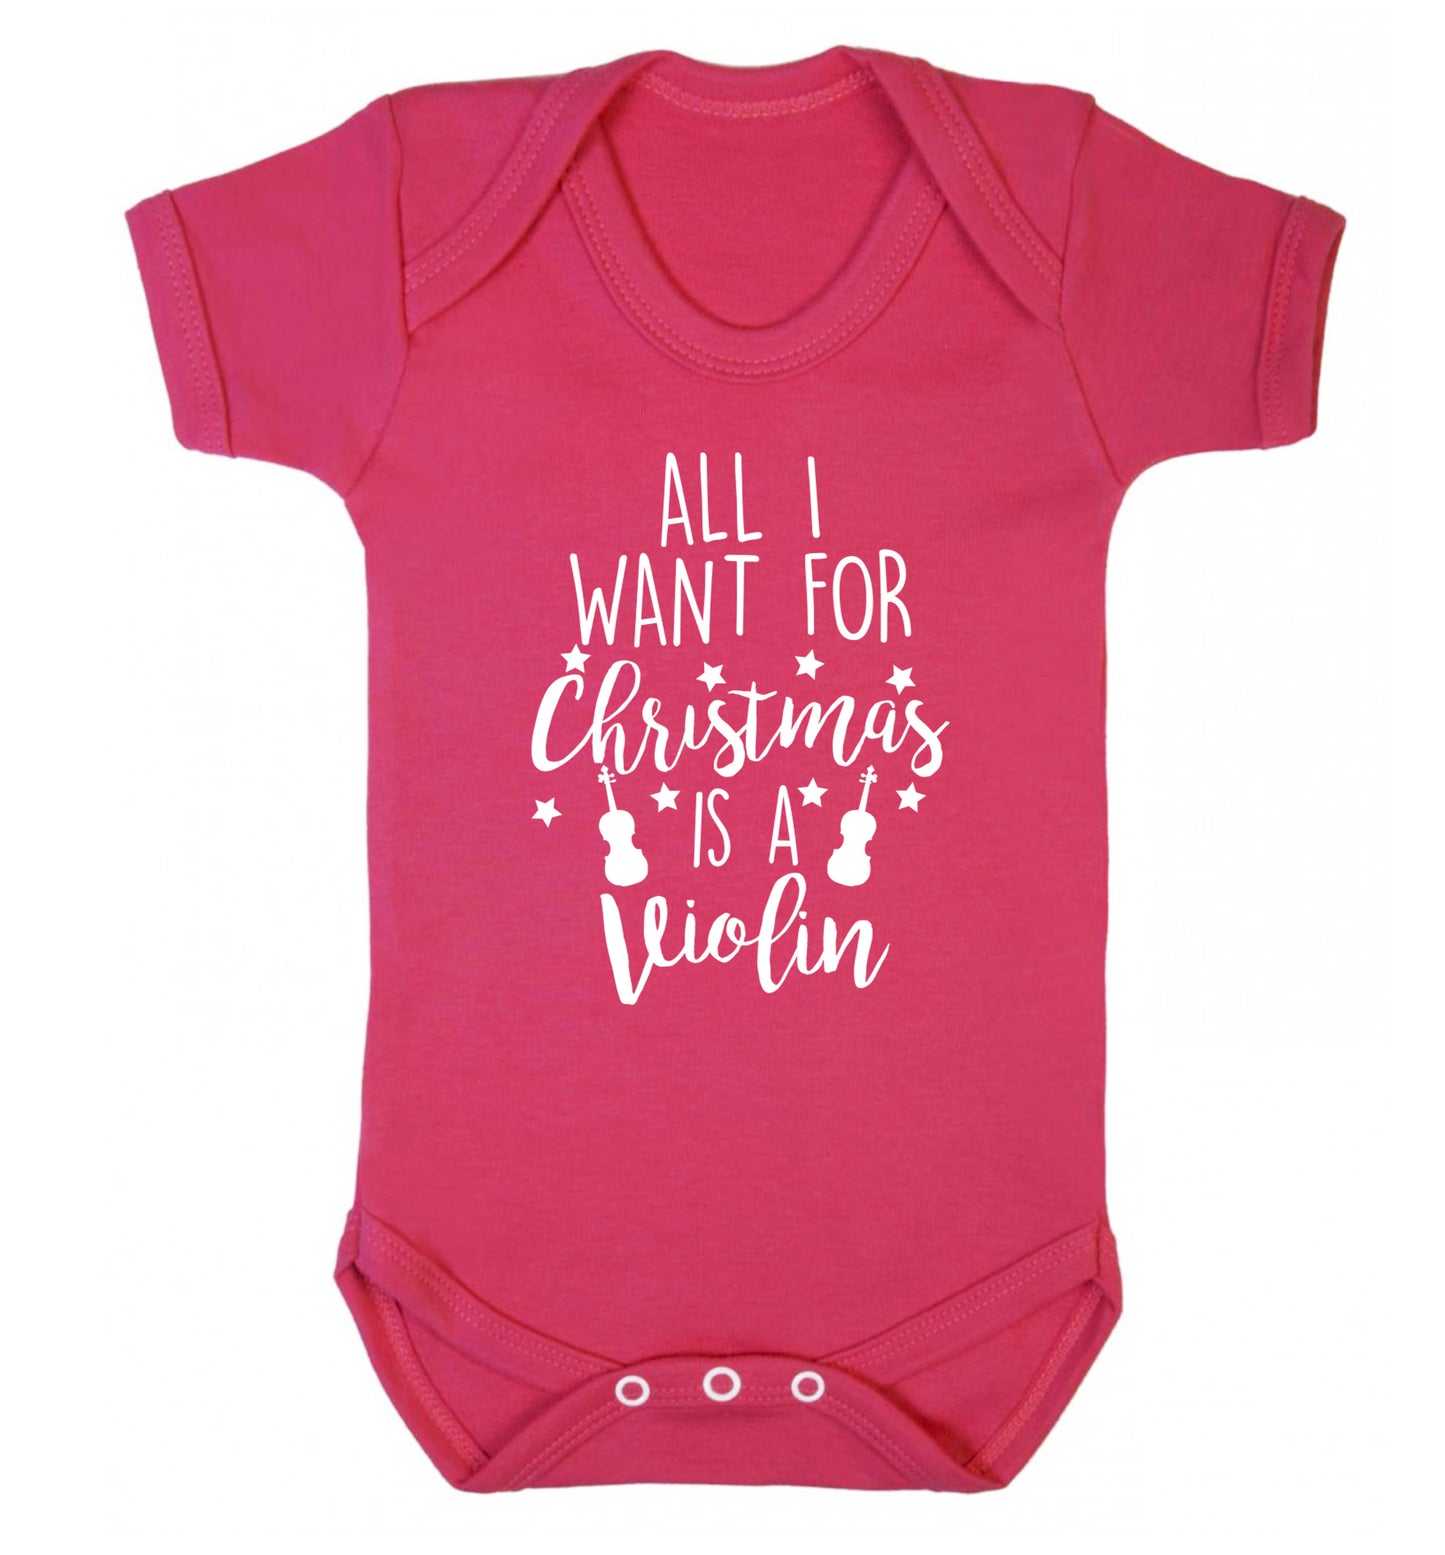 All I Want For Christmas is a Violin Baby Vest dark pink 18-24 months